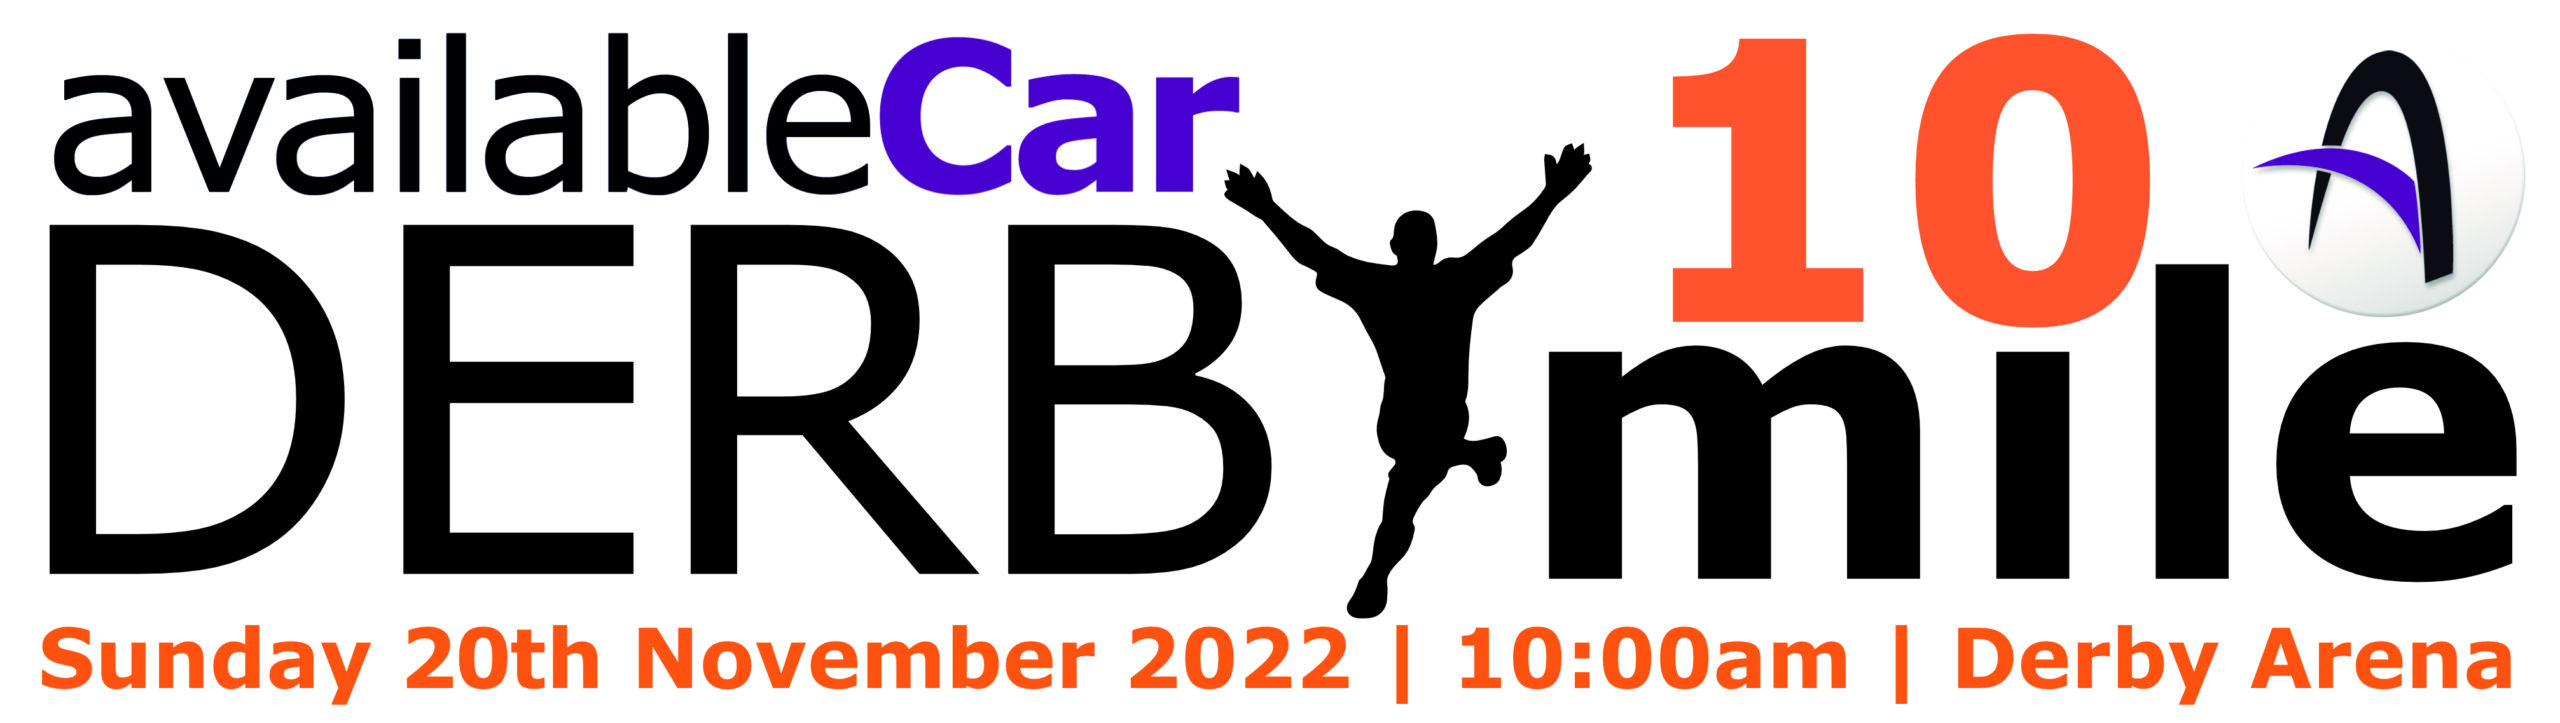 The Available Car Derby 10 Mile